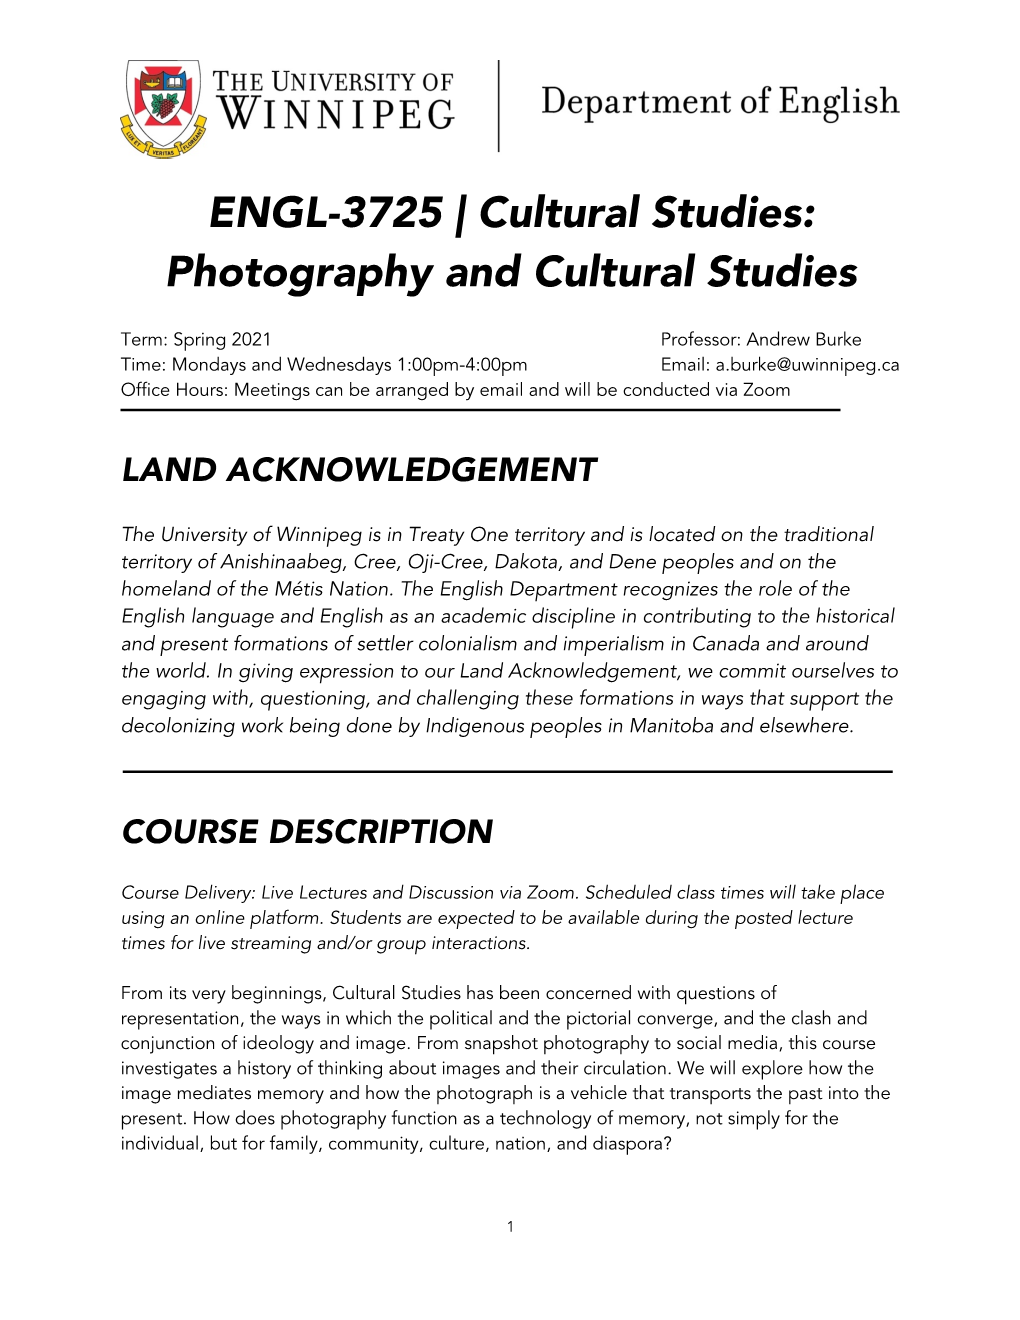 Cultural Studies: Photography and Cultural Studies